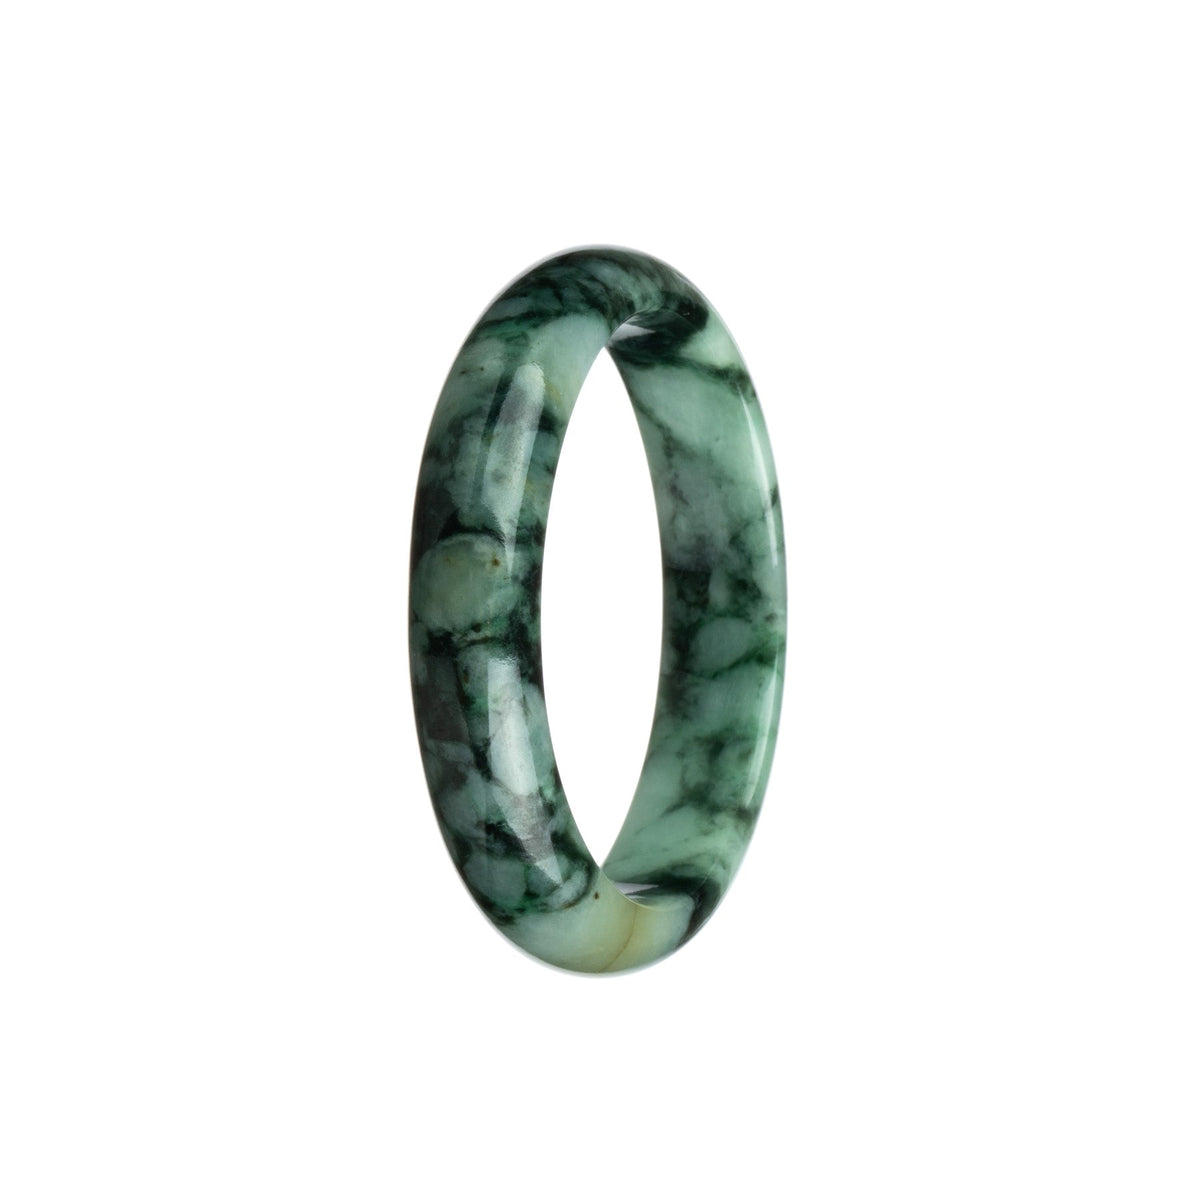 A half moon-shaped jade bracelet in pale green and dark green with a traditional pattern, measuring 54mm.